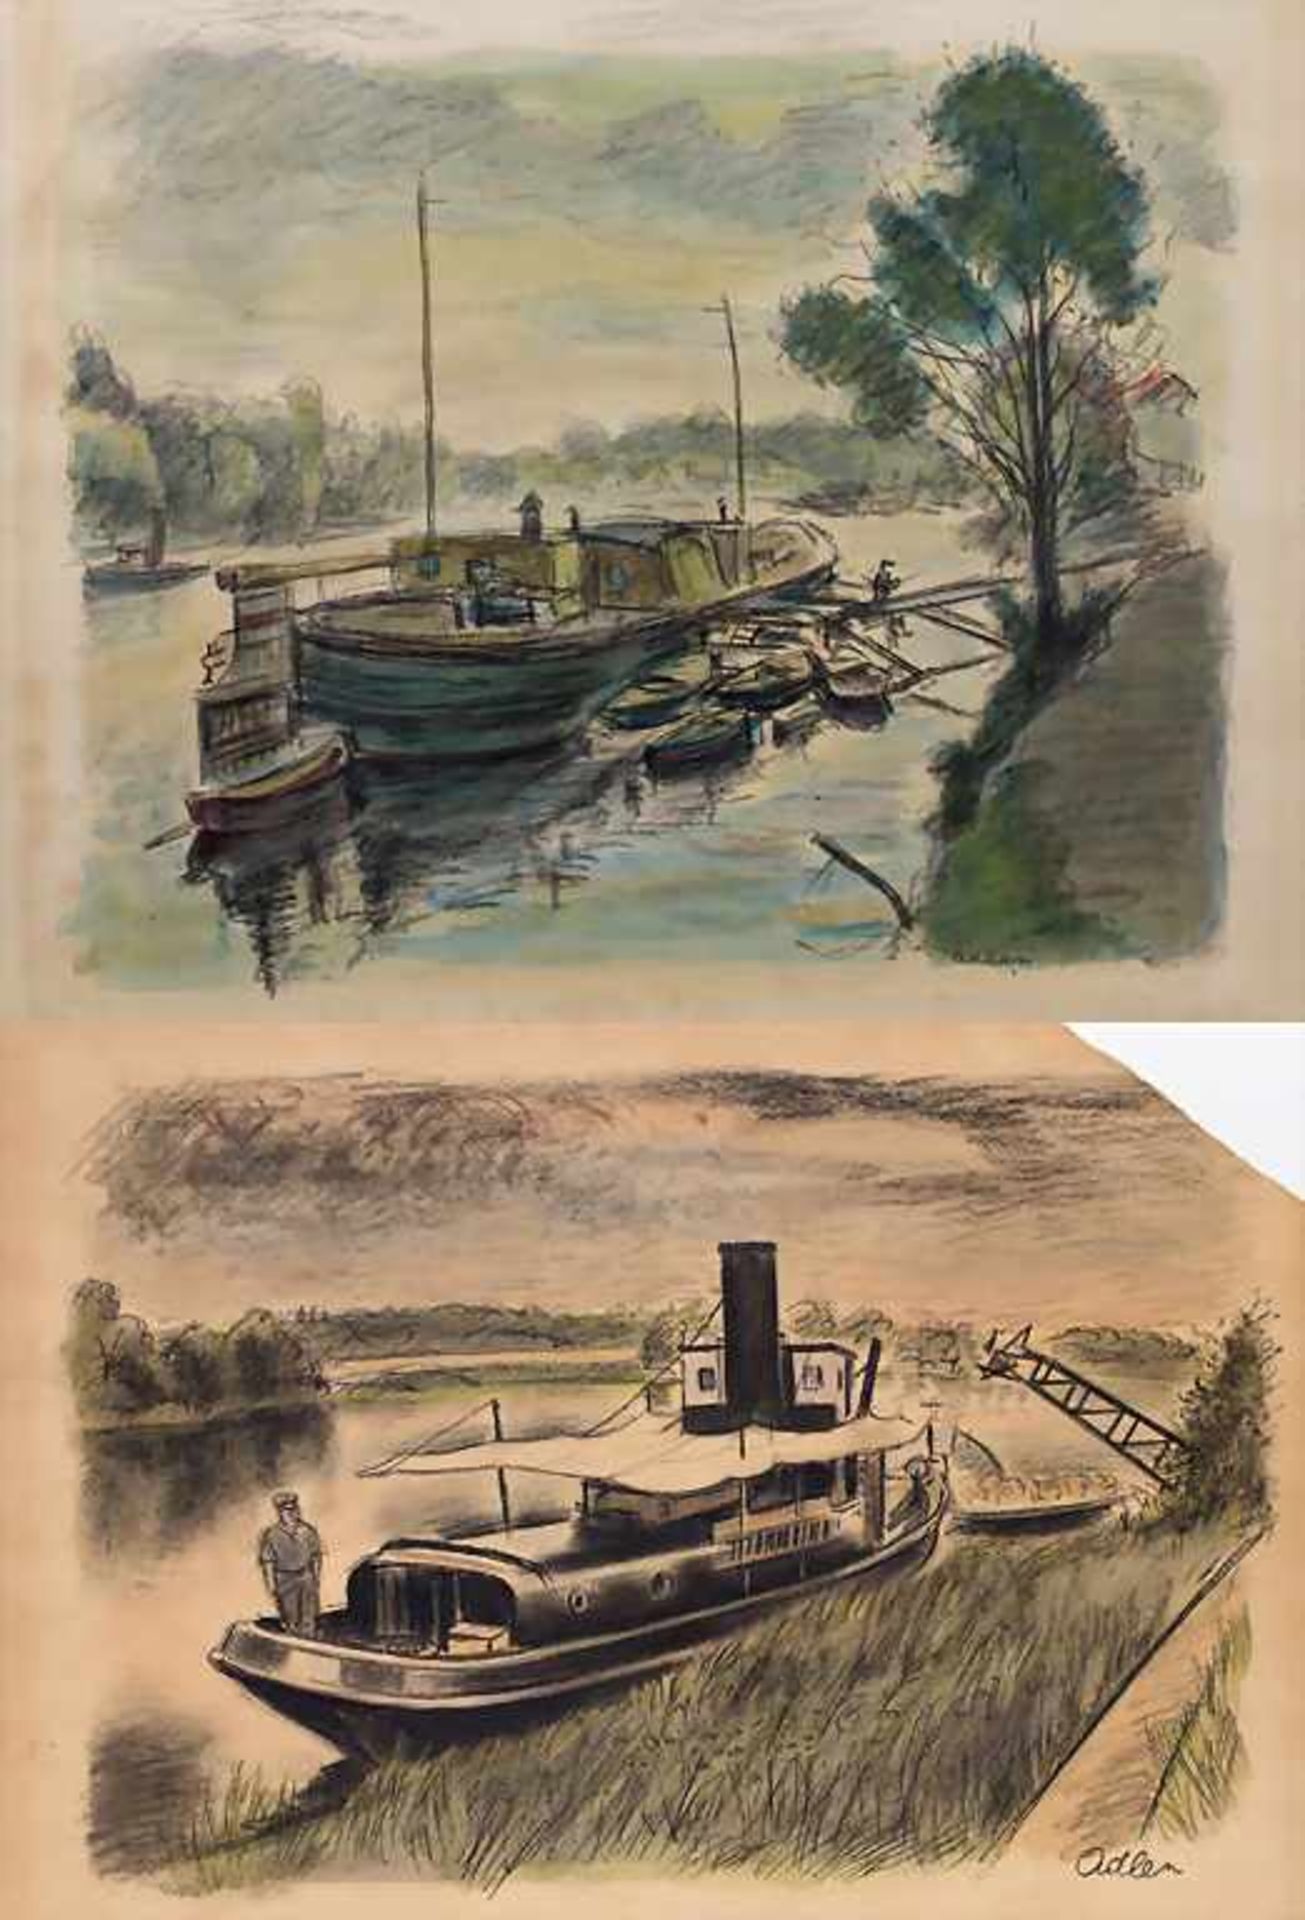 Michel Adlen (1898-1980), 'Boote am Flussufer' / 'Boats by the river'